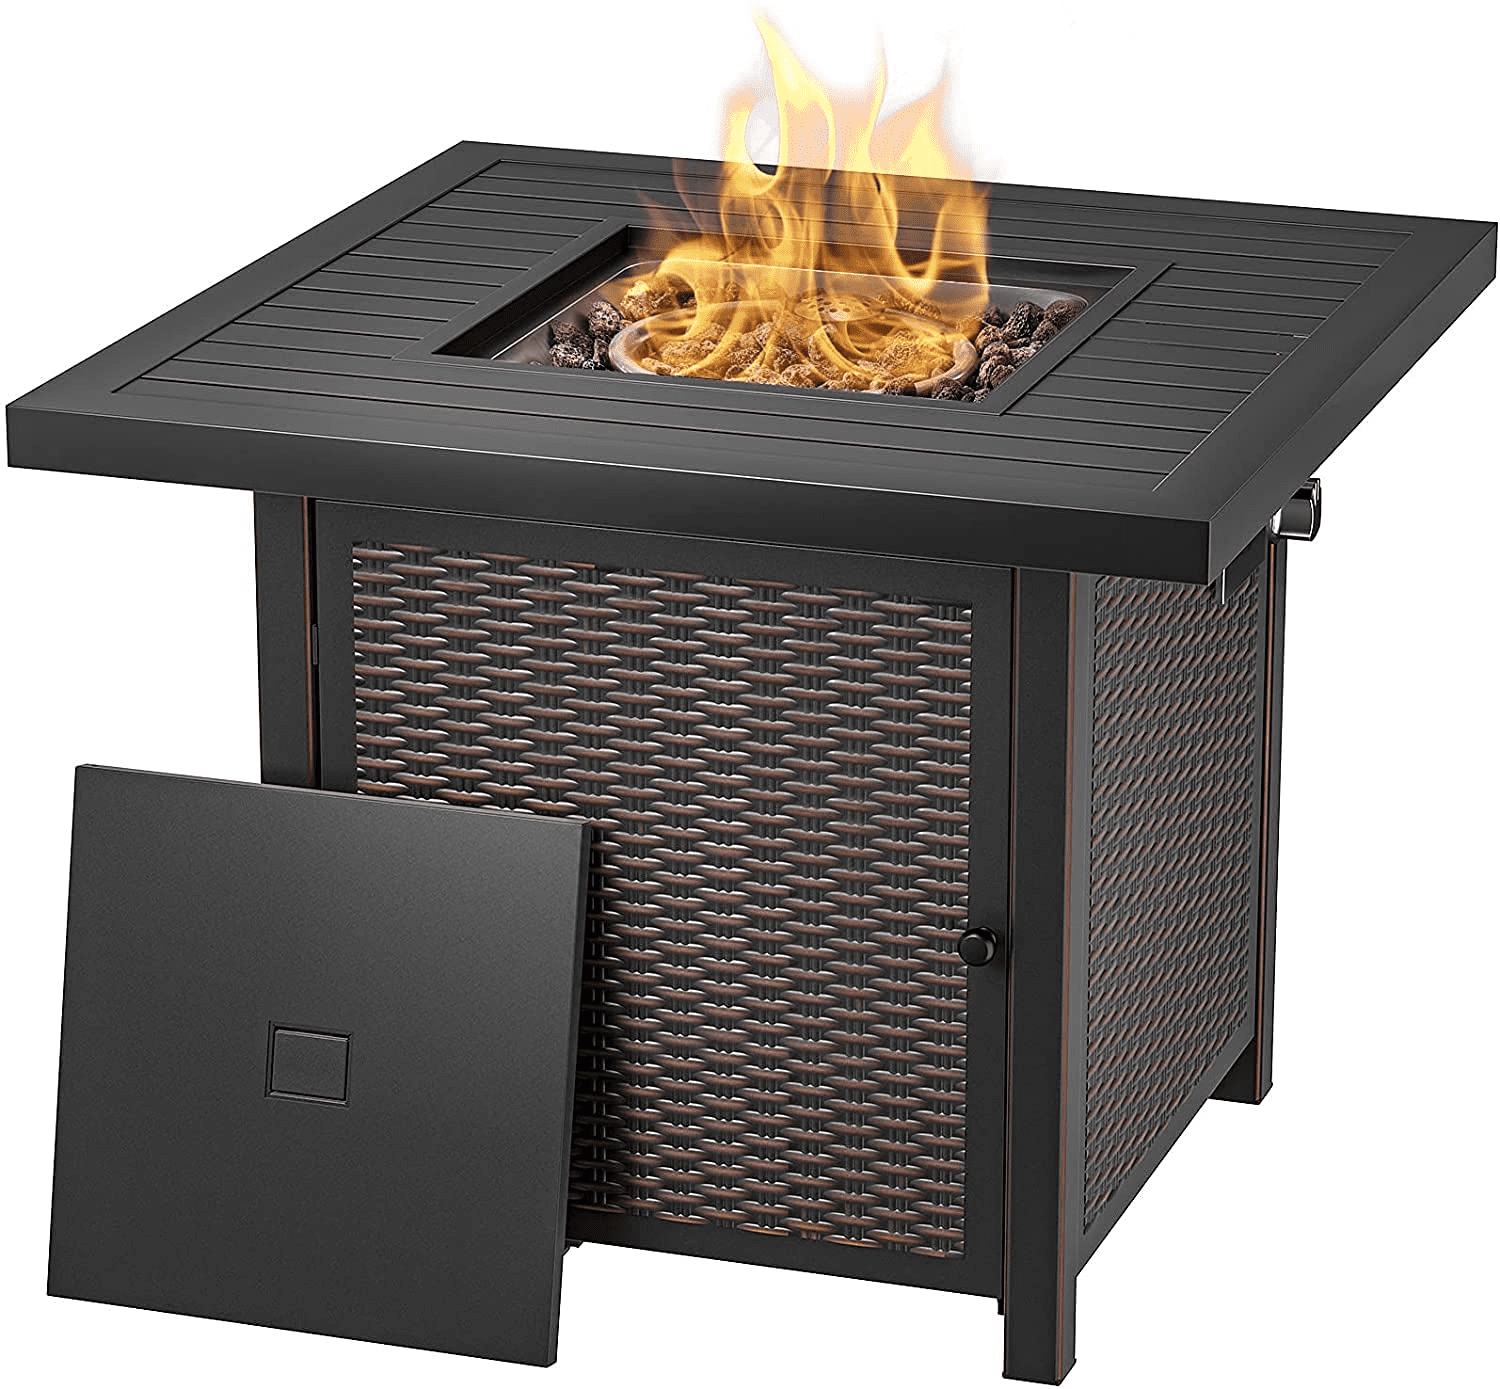 60,000BTU Auto-Ignition Fire Pit Table with Glass Wind Guard 43 Inch Propane Fire Pit Propane Fire Pit Table CSA Approved Outdoor Fire Pit for Garden with Red Lava Stone and Table Lid. 